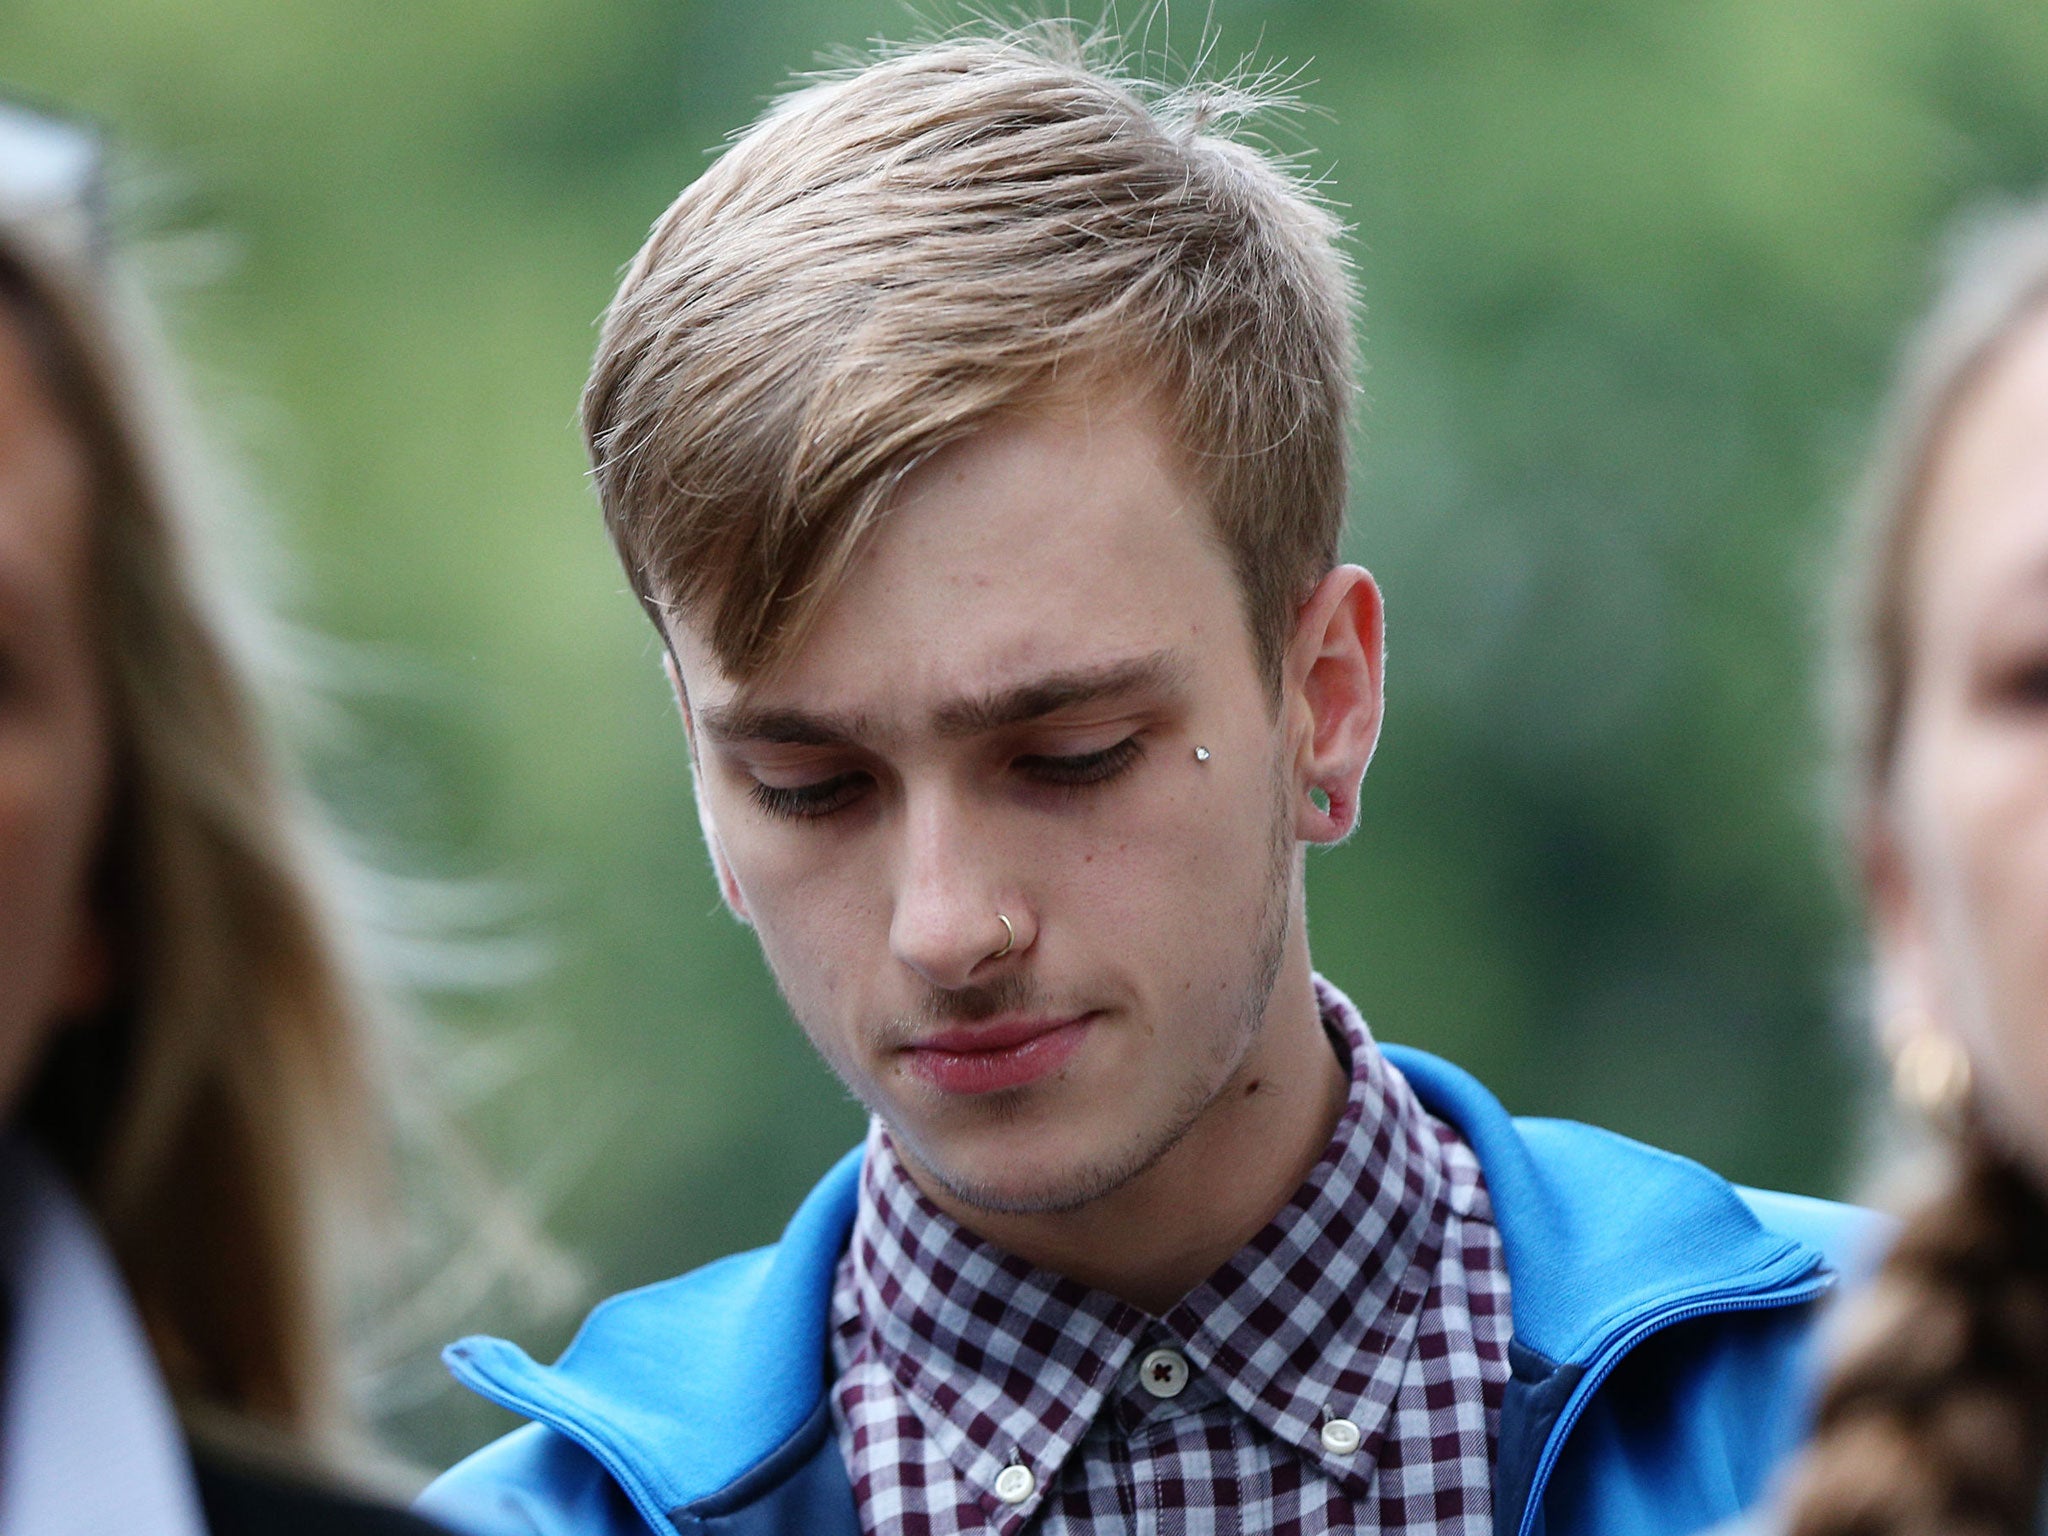 Charlie Alliston was sentenced to 18 months in jail for killing a pedestrian while riding an illegal bike